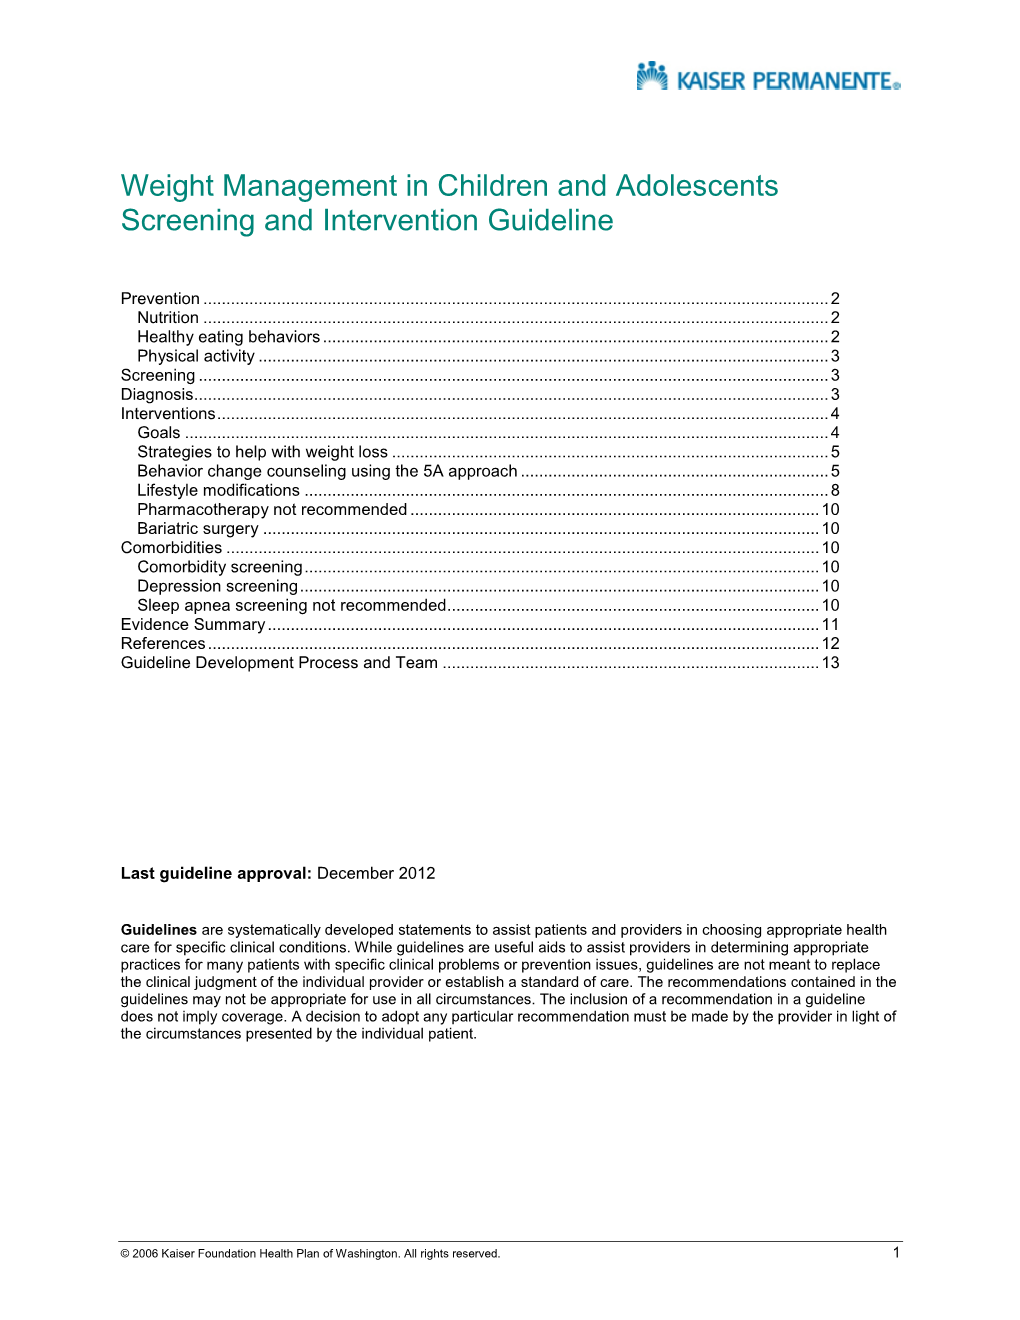 Weight Management Guideline: Children and Adolescents